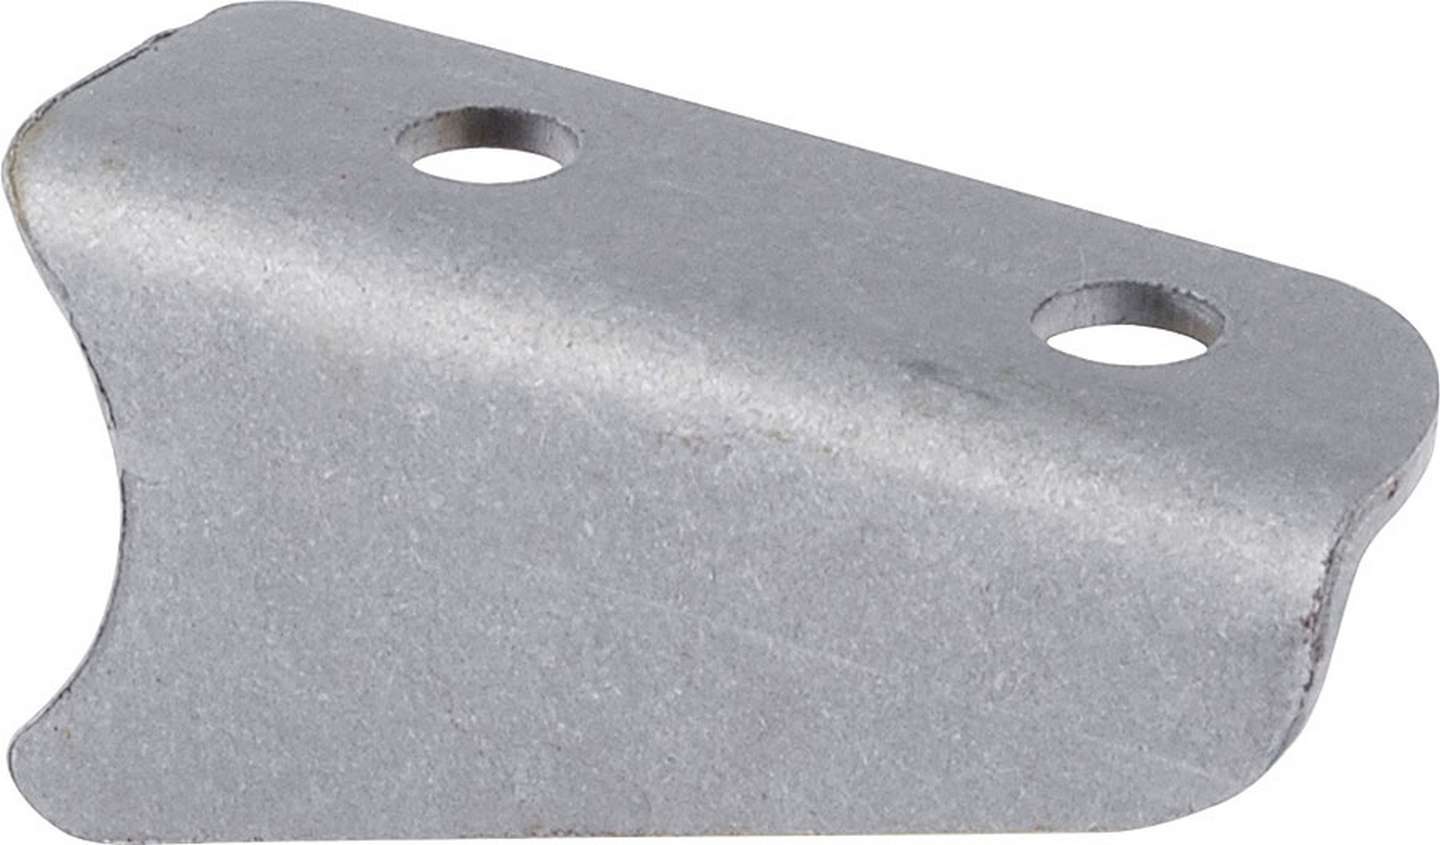 Allstar Performance 60028 Quickener Bracket, 1-1/2 or 1-3/4 in Tubing, Two 7/16 in Mounting Holes, Steel, Natural, Each